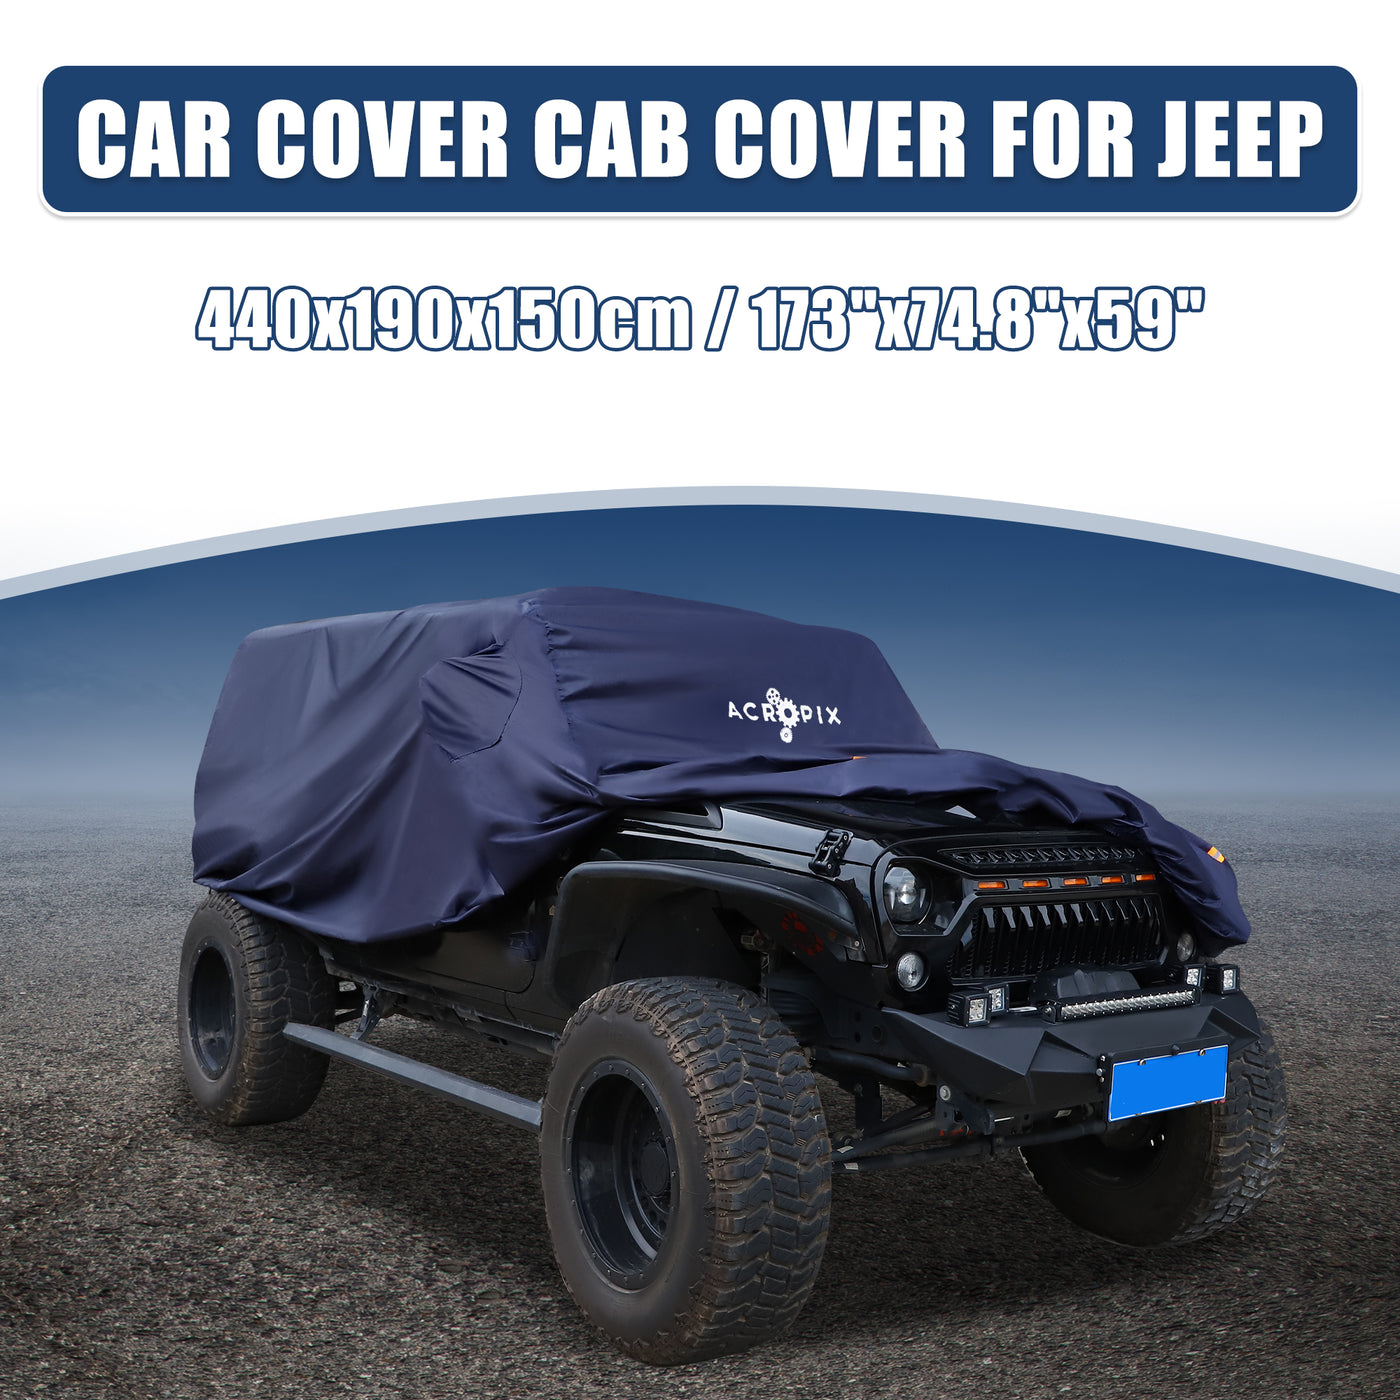 ACROPIX SUV Car Cover Fit for Jeep Wrangler JK JL 2 Door 2007-2017 with Driver Door Snow Rain All Weather Protection - Pack of 1 Navy Blue